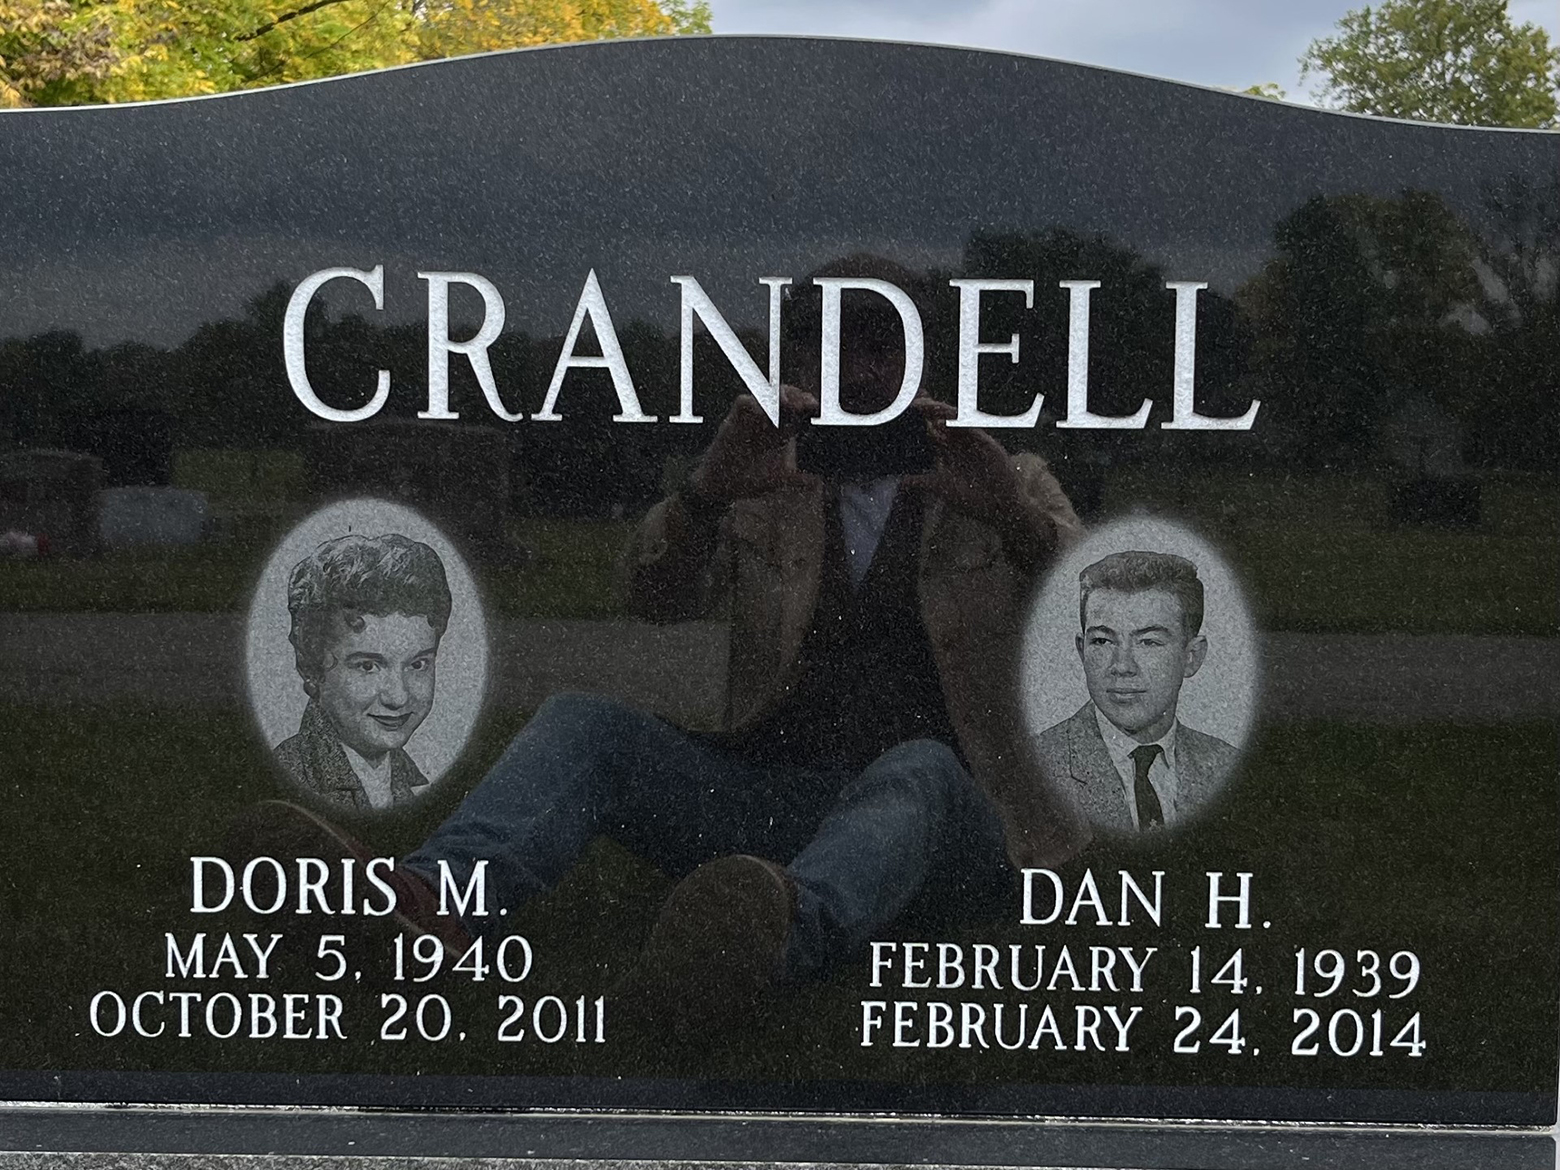 Doris M. Crandell and Dan H. Crandell’s headstone with images of them etched into it. Other headstones are reflected in the Crandell’s headstone. Also reflected is an image of Doug Crandell sitting down while photographing his parents' headstone.